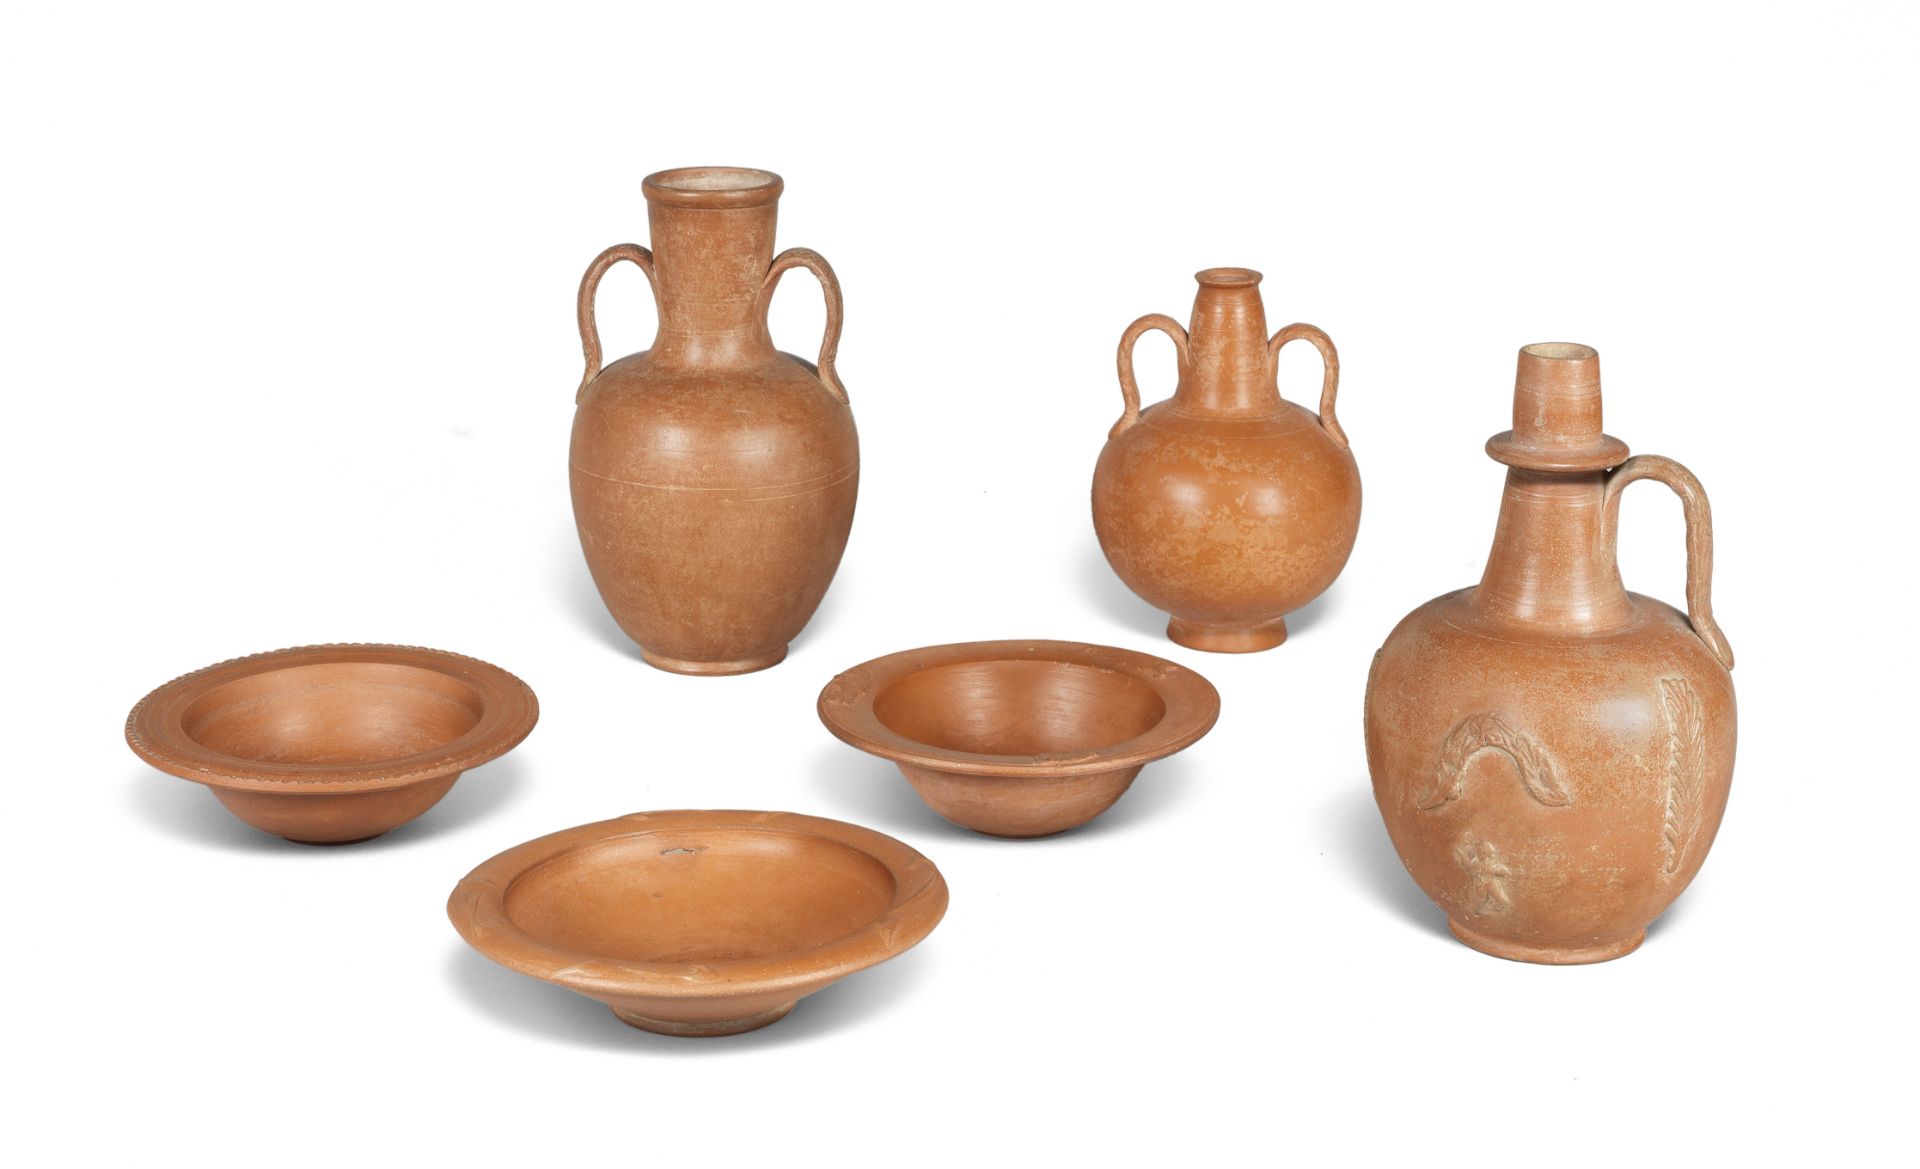 Five Roman red-slip ware pottery vessels and a Roman red-gloss ware bowl, 6